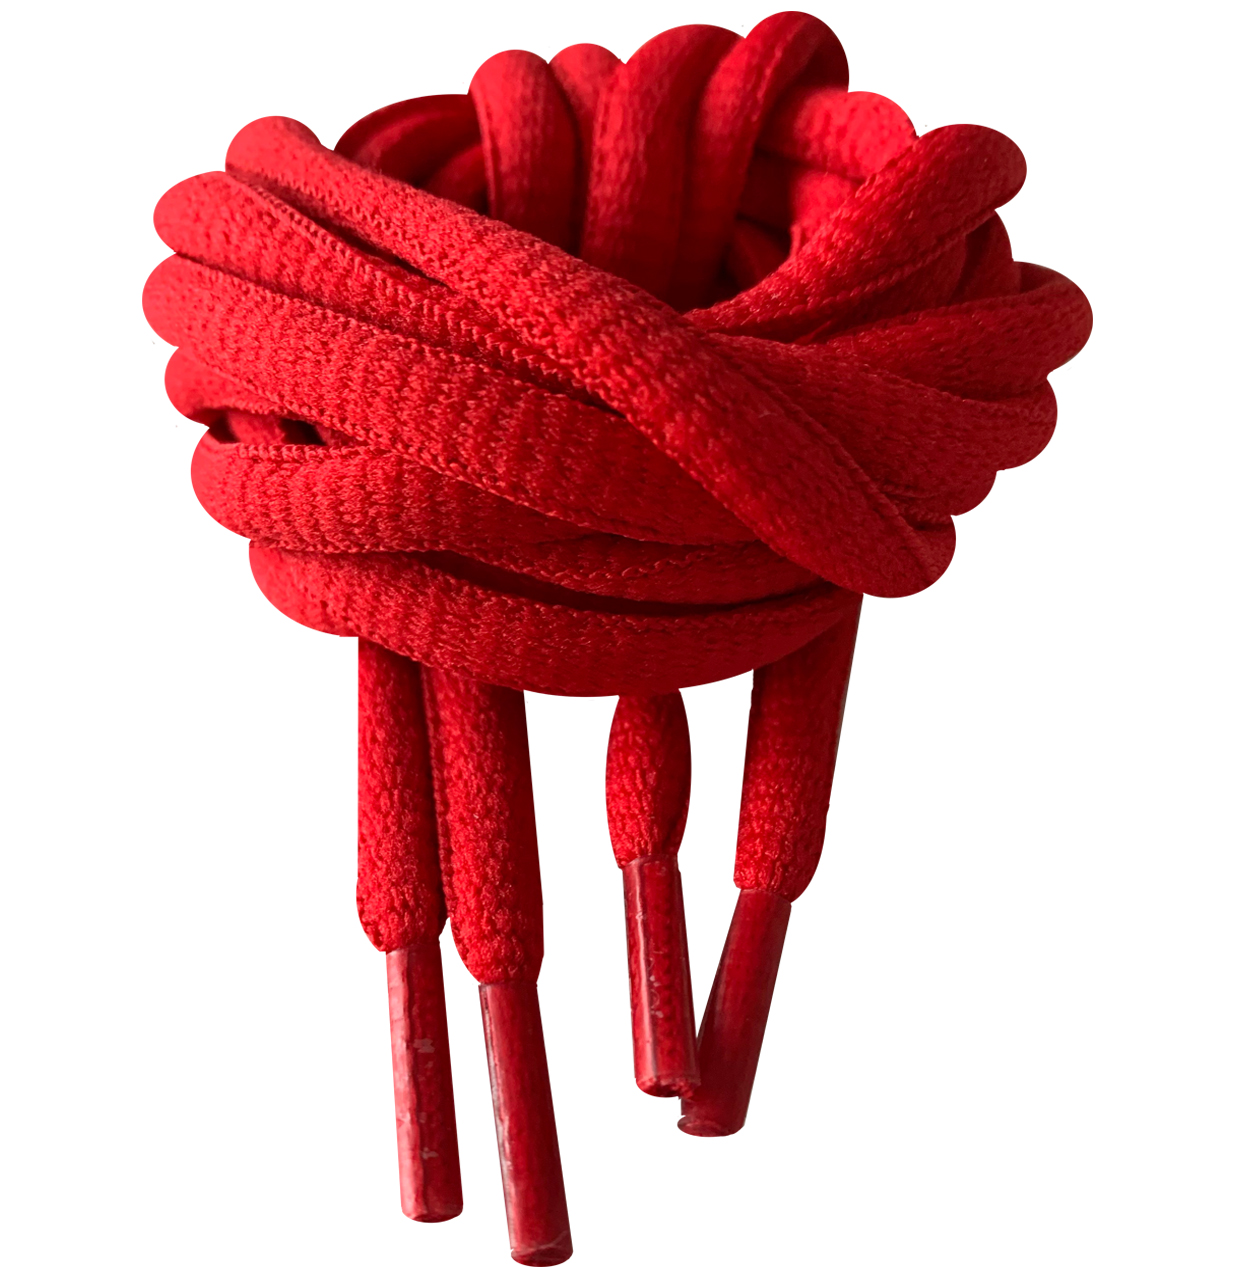 Red-Oval-Sport-Shoelaces.jpg